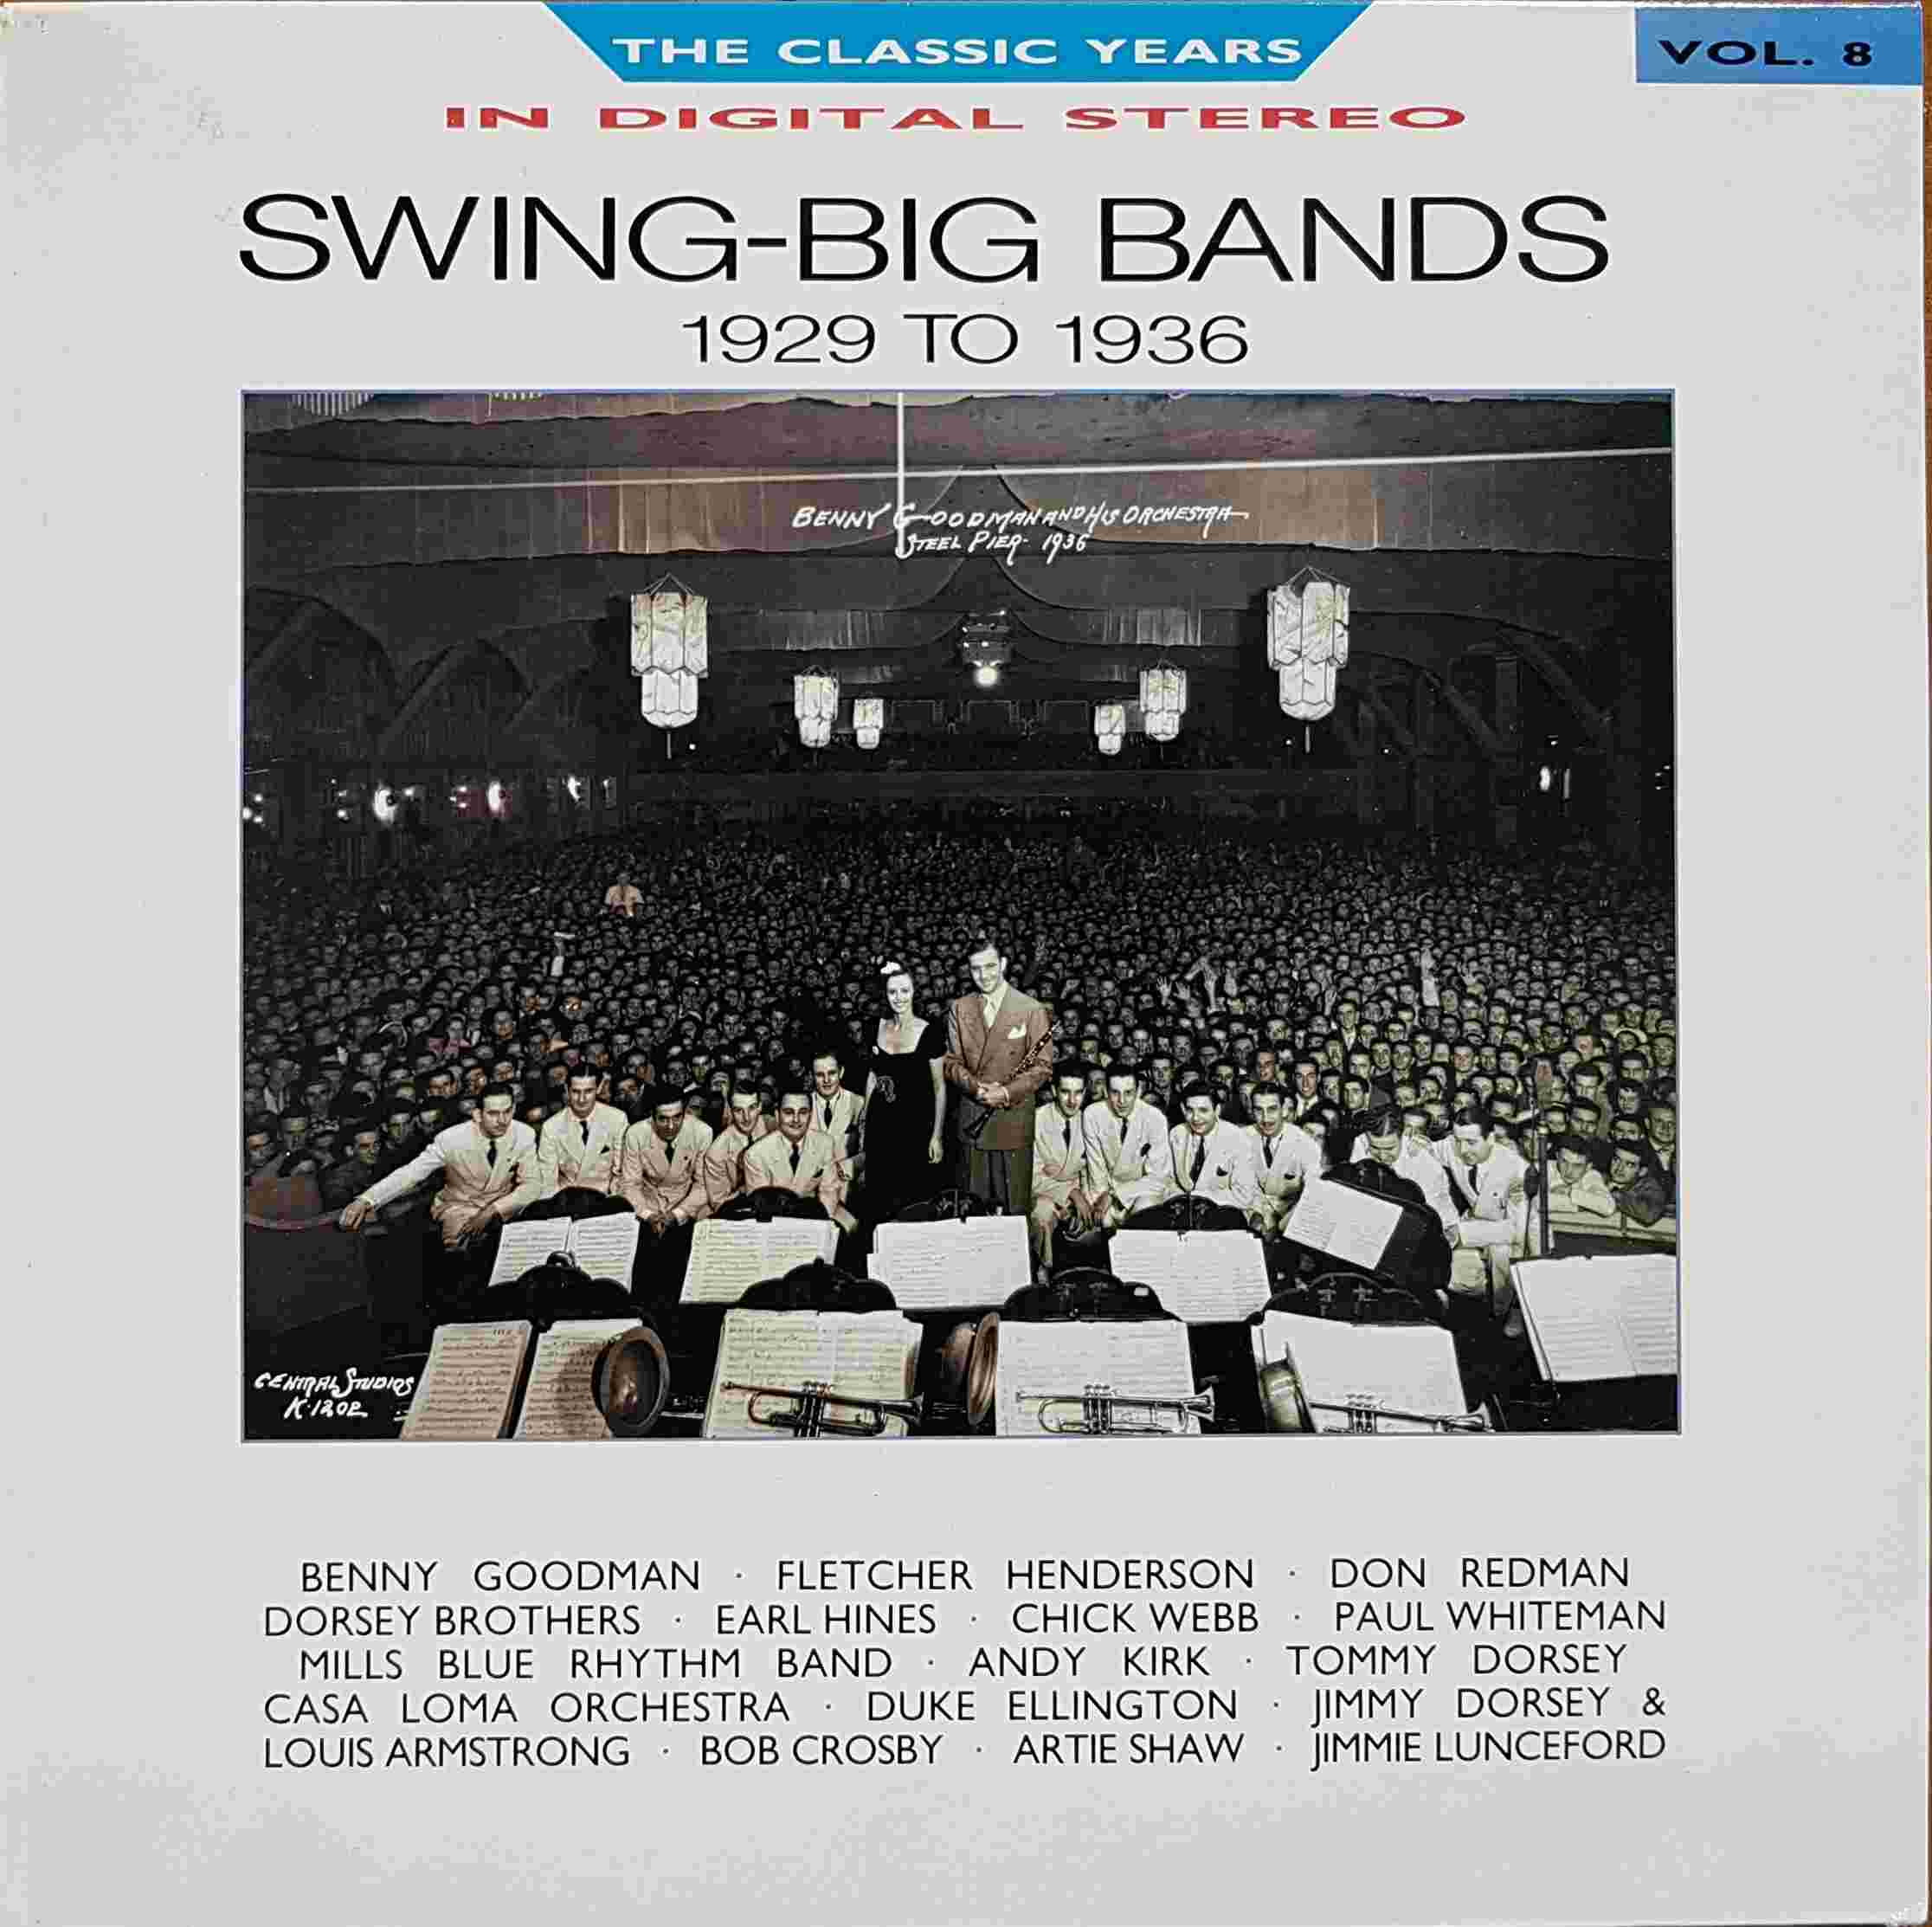 Picture of REB 655 Classic years - Volume 8, Swing big bands by artist Various from the BBC albums - Records and Tapes library